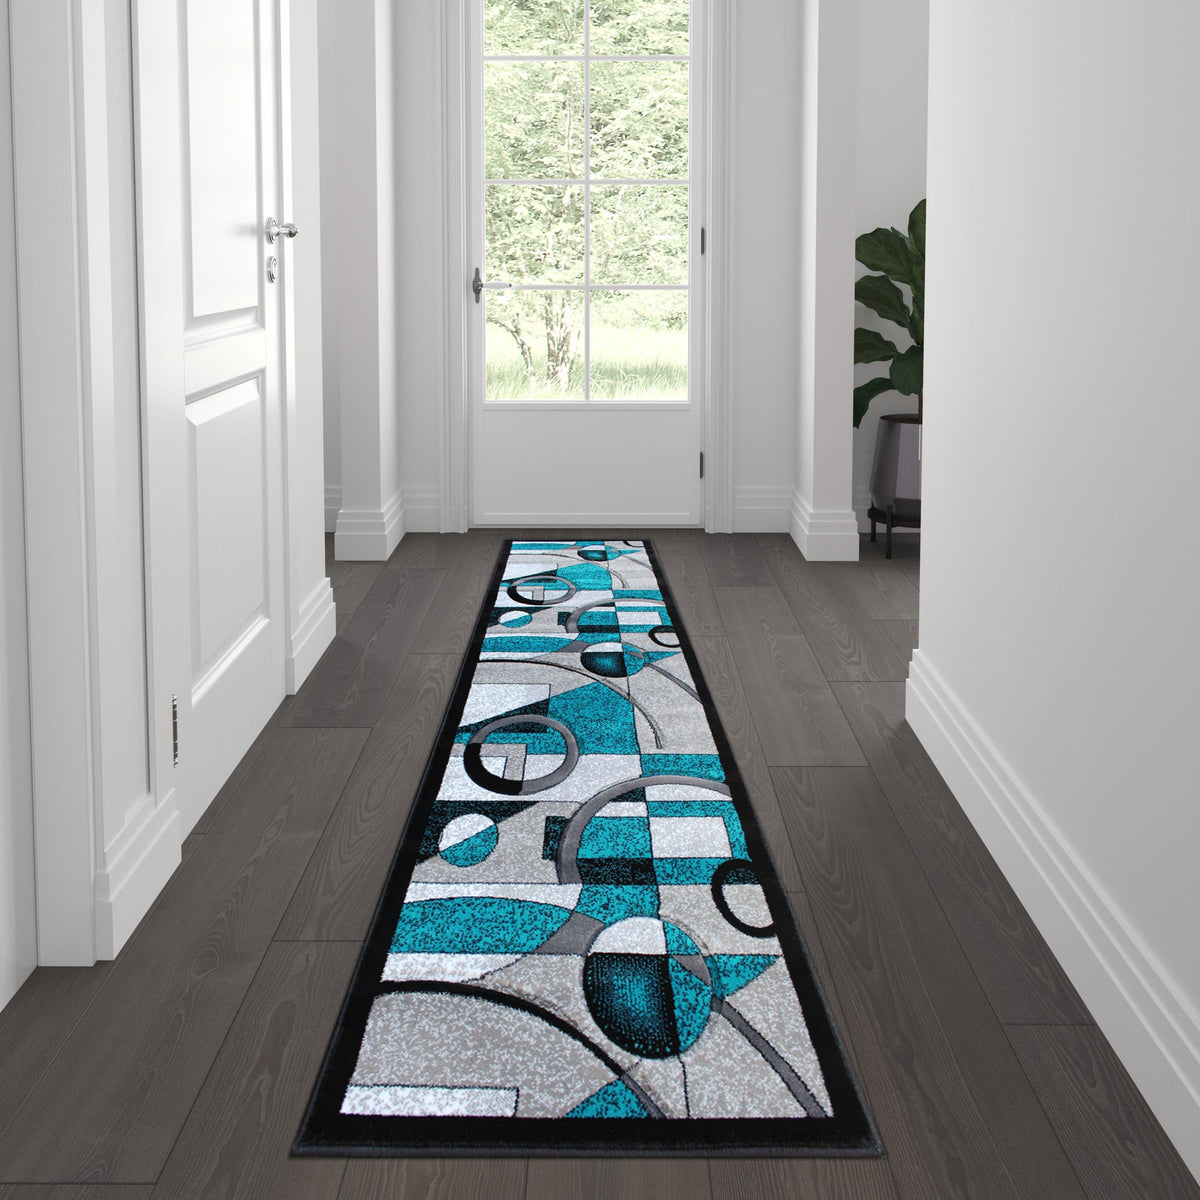 Turquoise,2' x 7' |#| Modern Geometric Abstract Area Rug - Turquoise, Black, & Gray - 2' x 7'